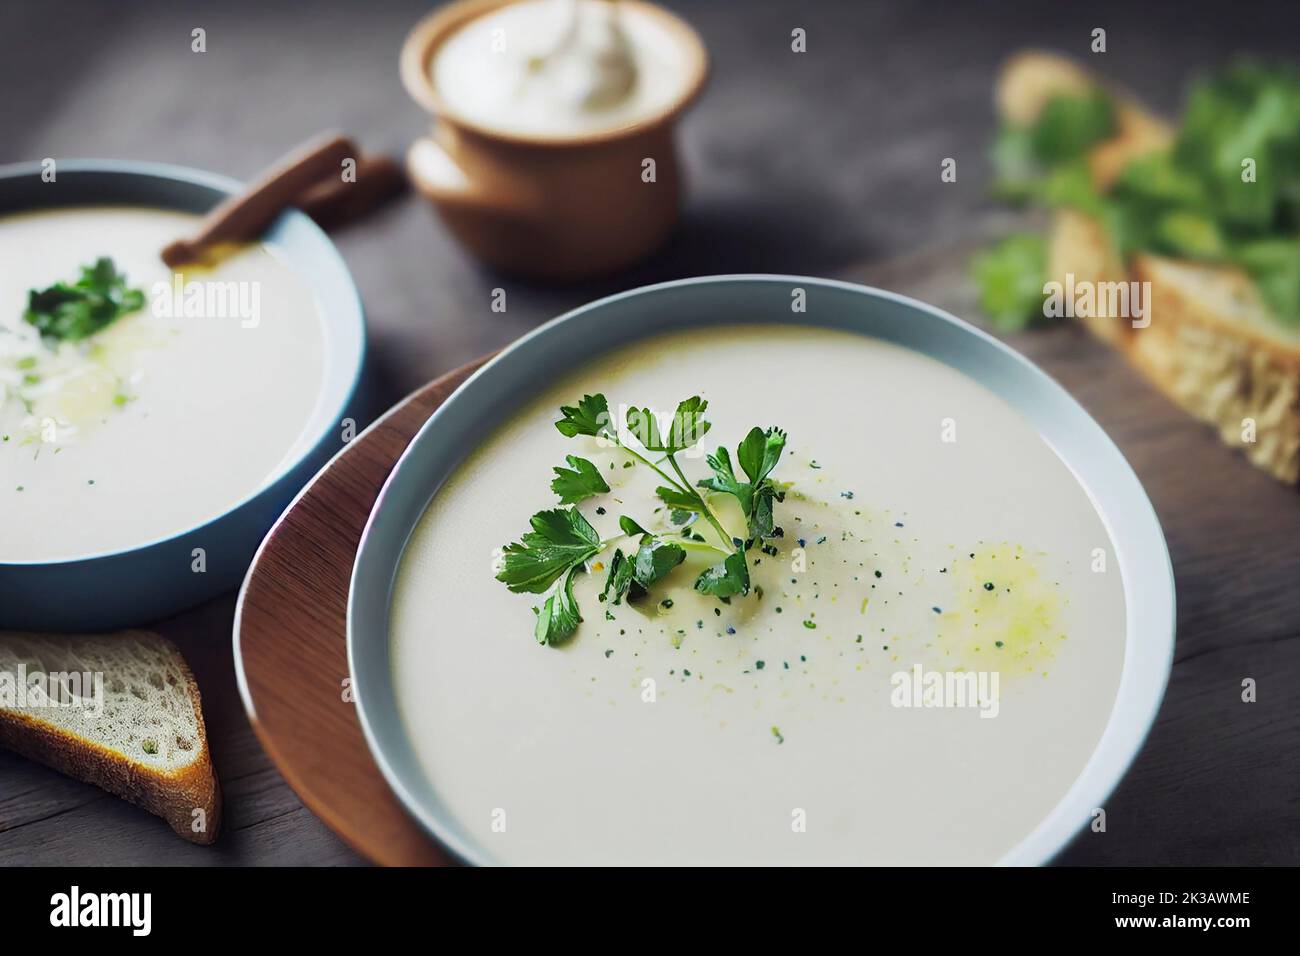 Potato cream soup puree, vegetarian meal on a wooden table, parsley garnish and toast, food photography and illustration Stock Photo